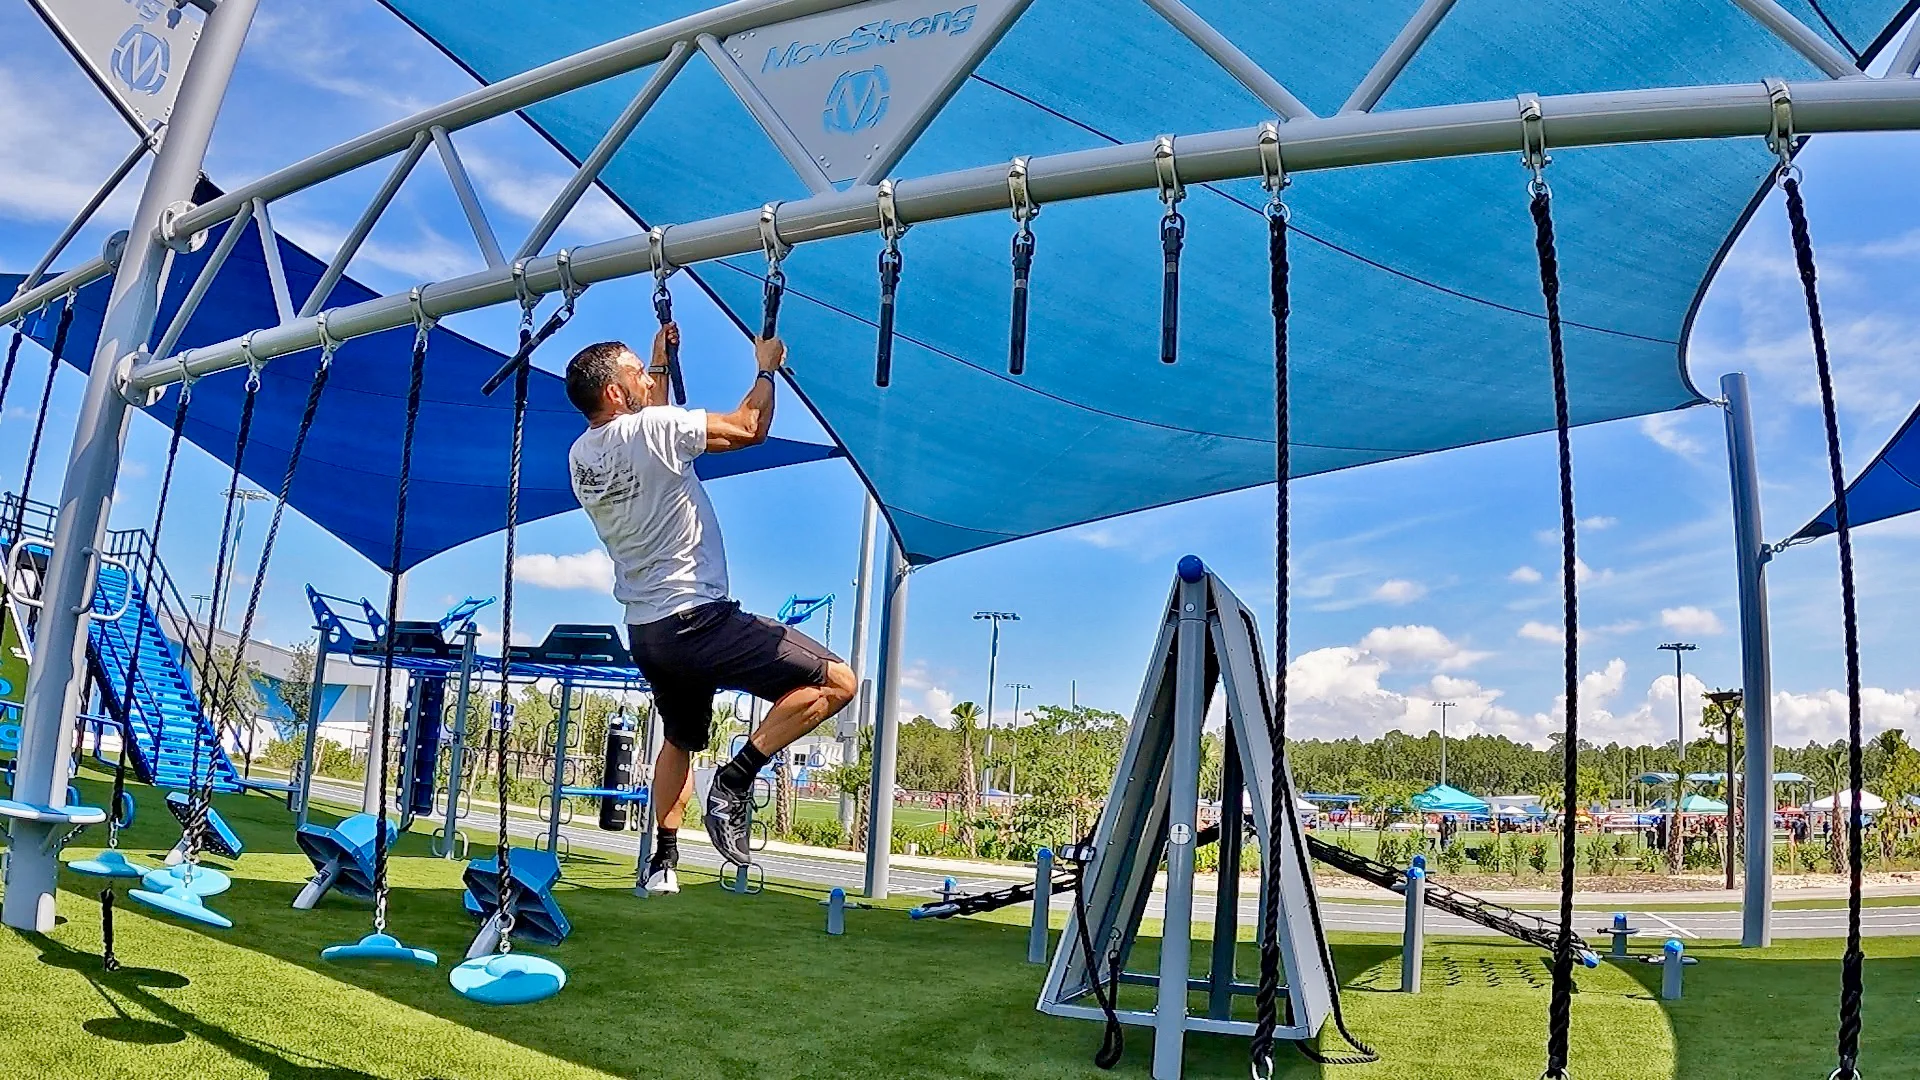 Paradise Coast Sports Complex Opens Outdoor Fitness Park - MoveStrong